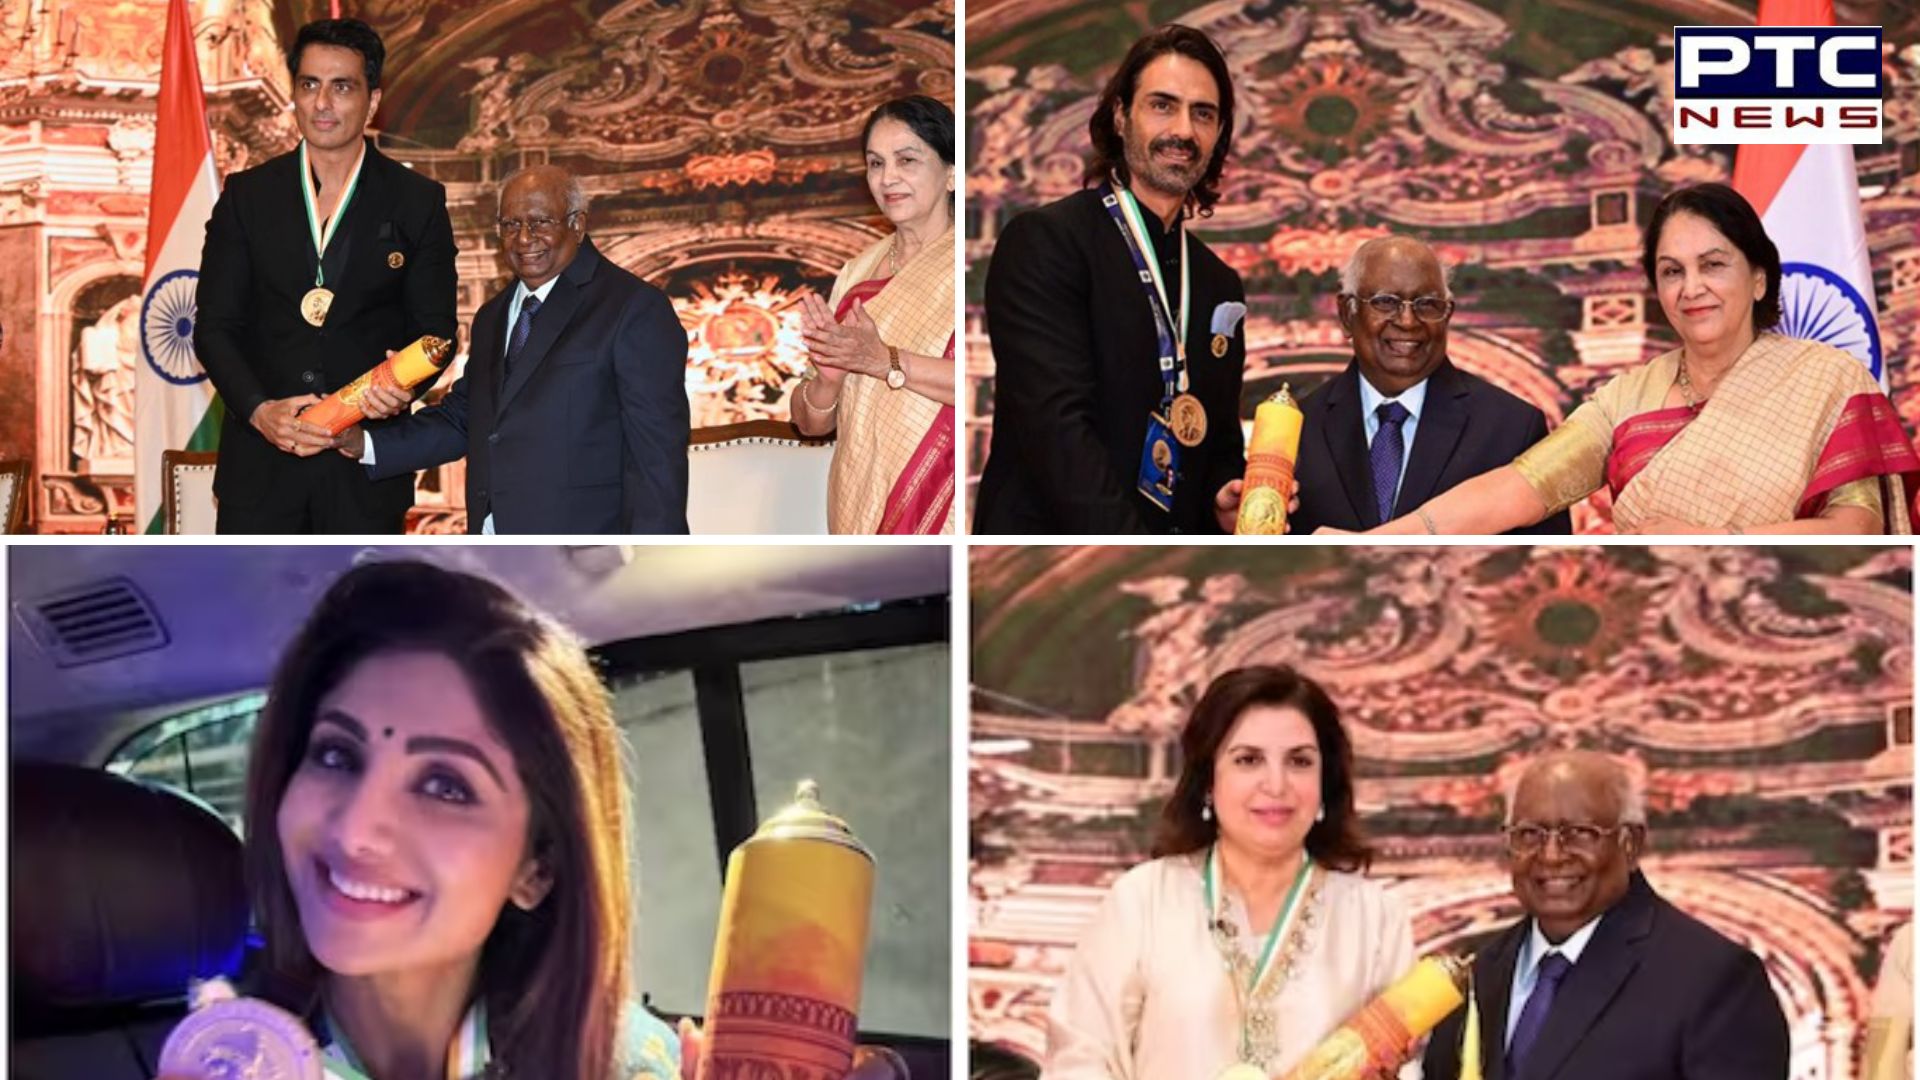 Champions of Change 2023 Award: These celebs honoured with highly prestigious Indian award; SEE PICS